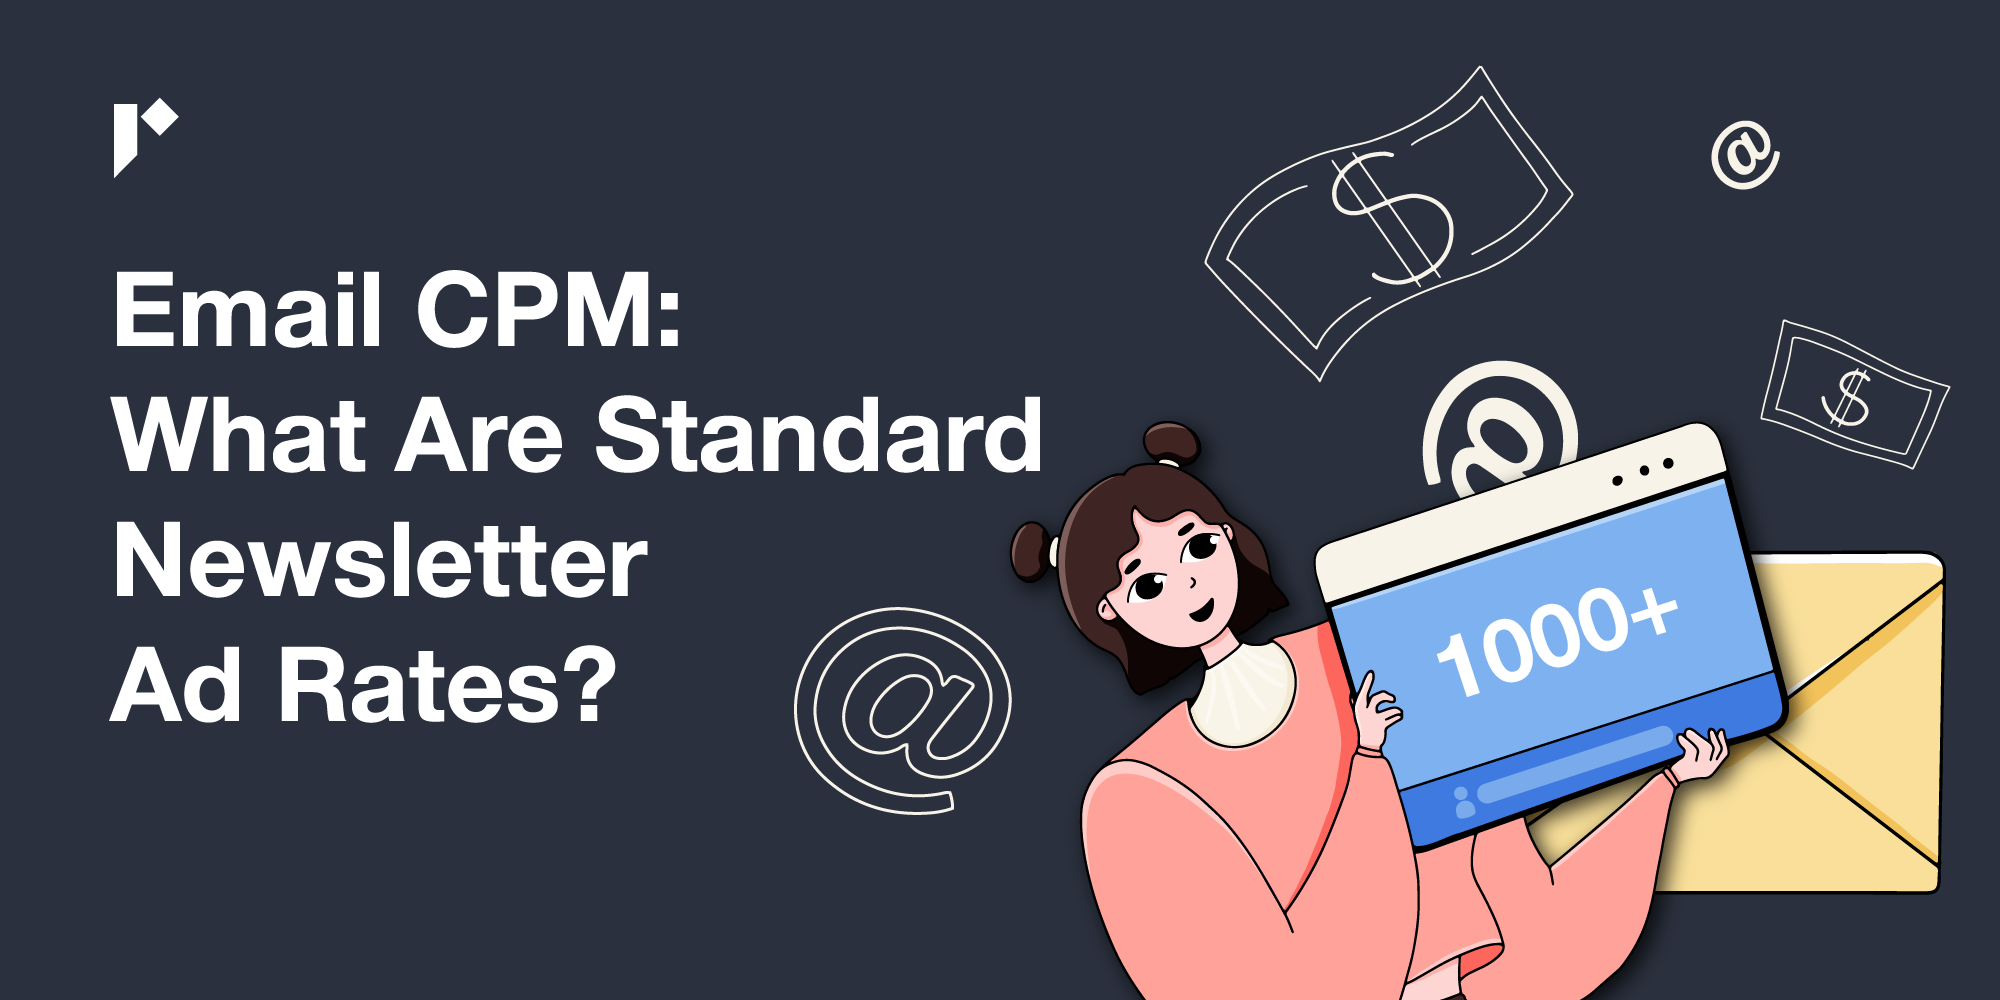 Email CPM: What Are Standard Newsletter Ad Rates?